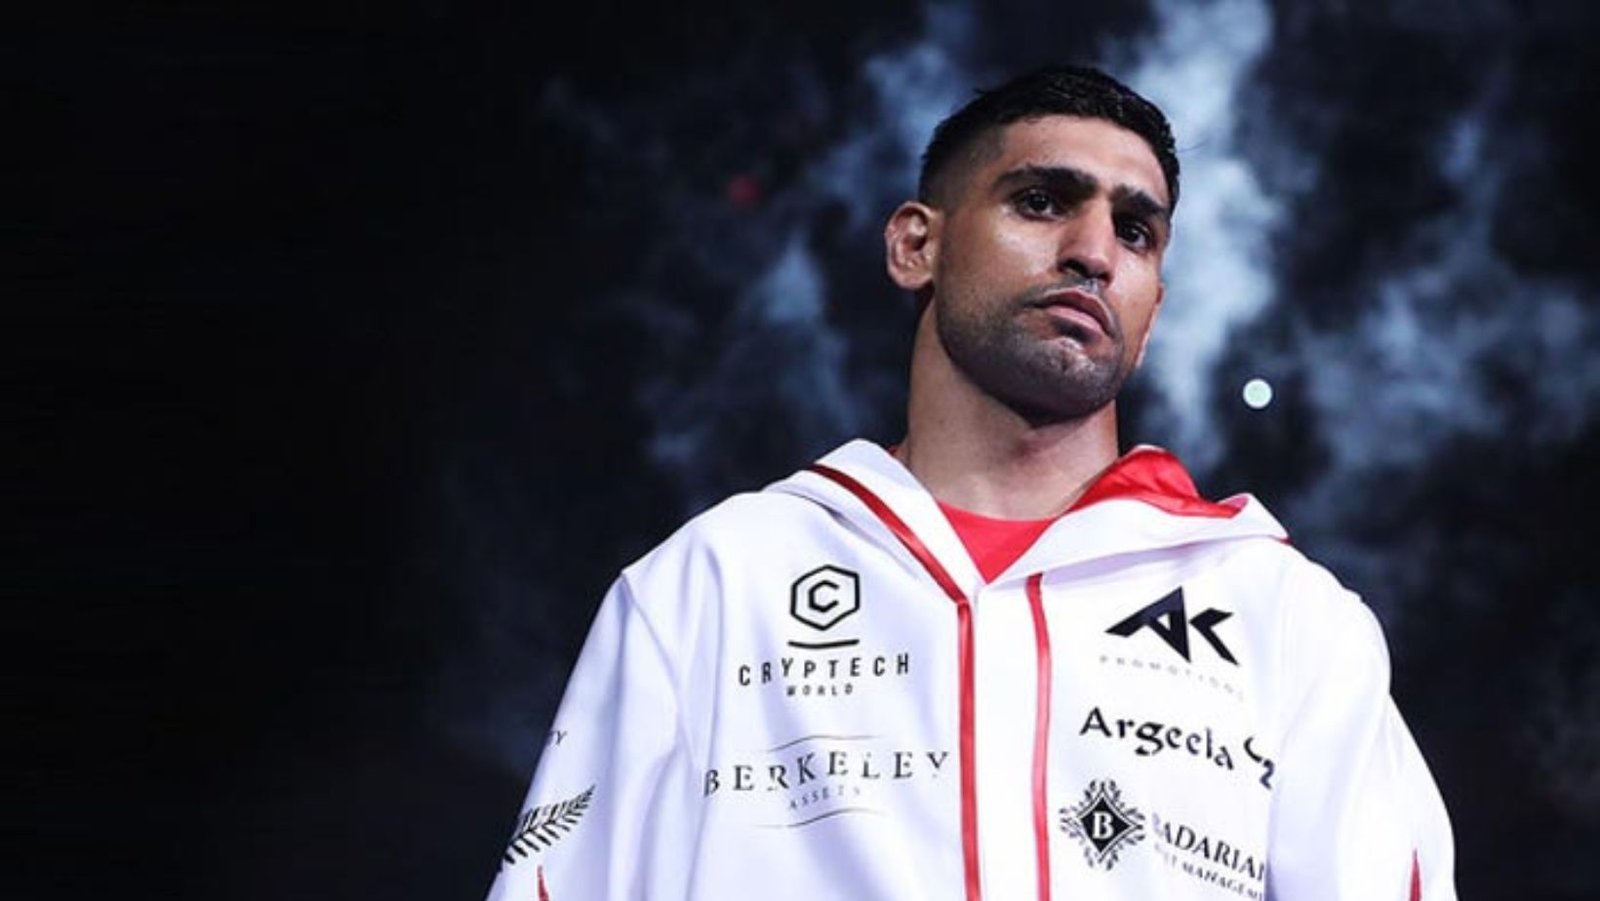 Amir Khan, a former world champion, discusses whether or not he will leave retirement